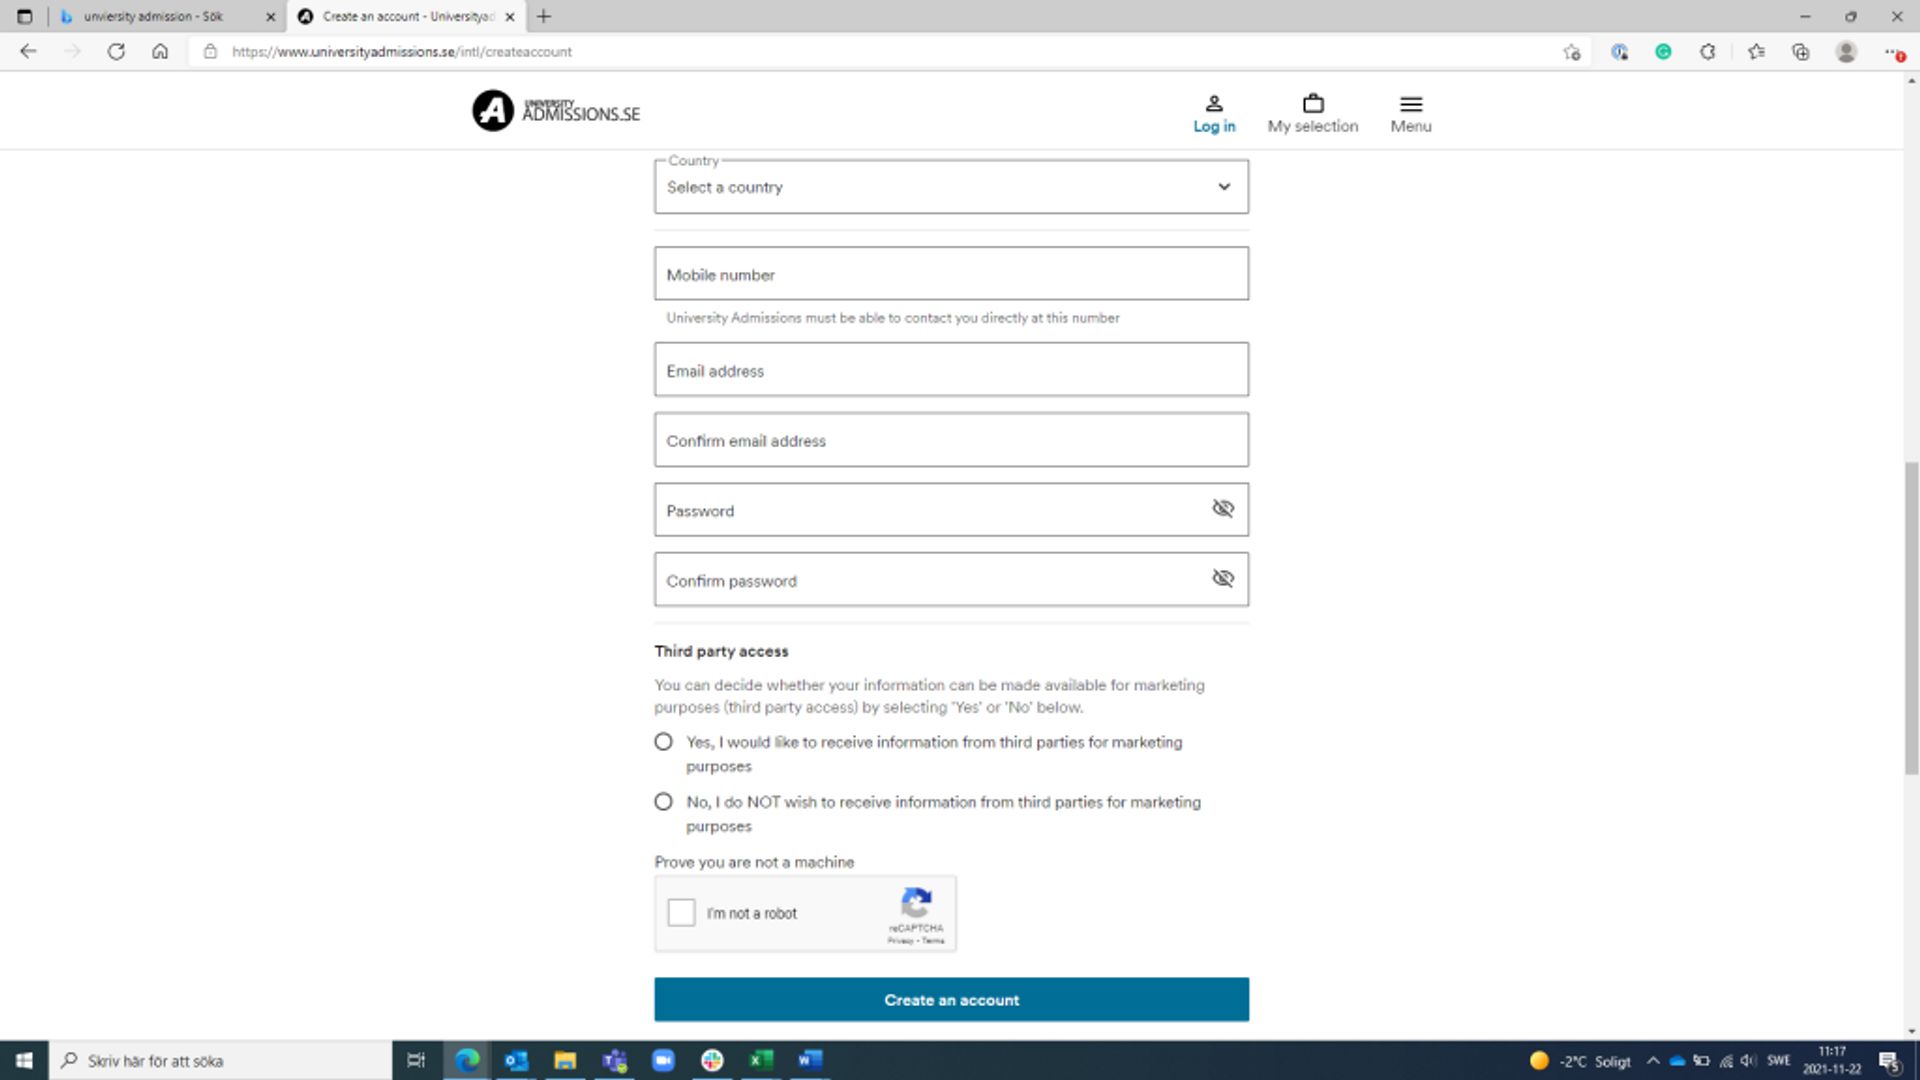 Screenshot of final step of creating an account on University Admissions.